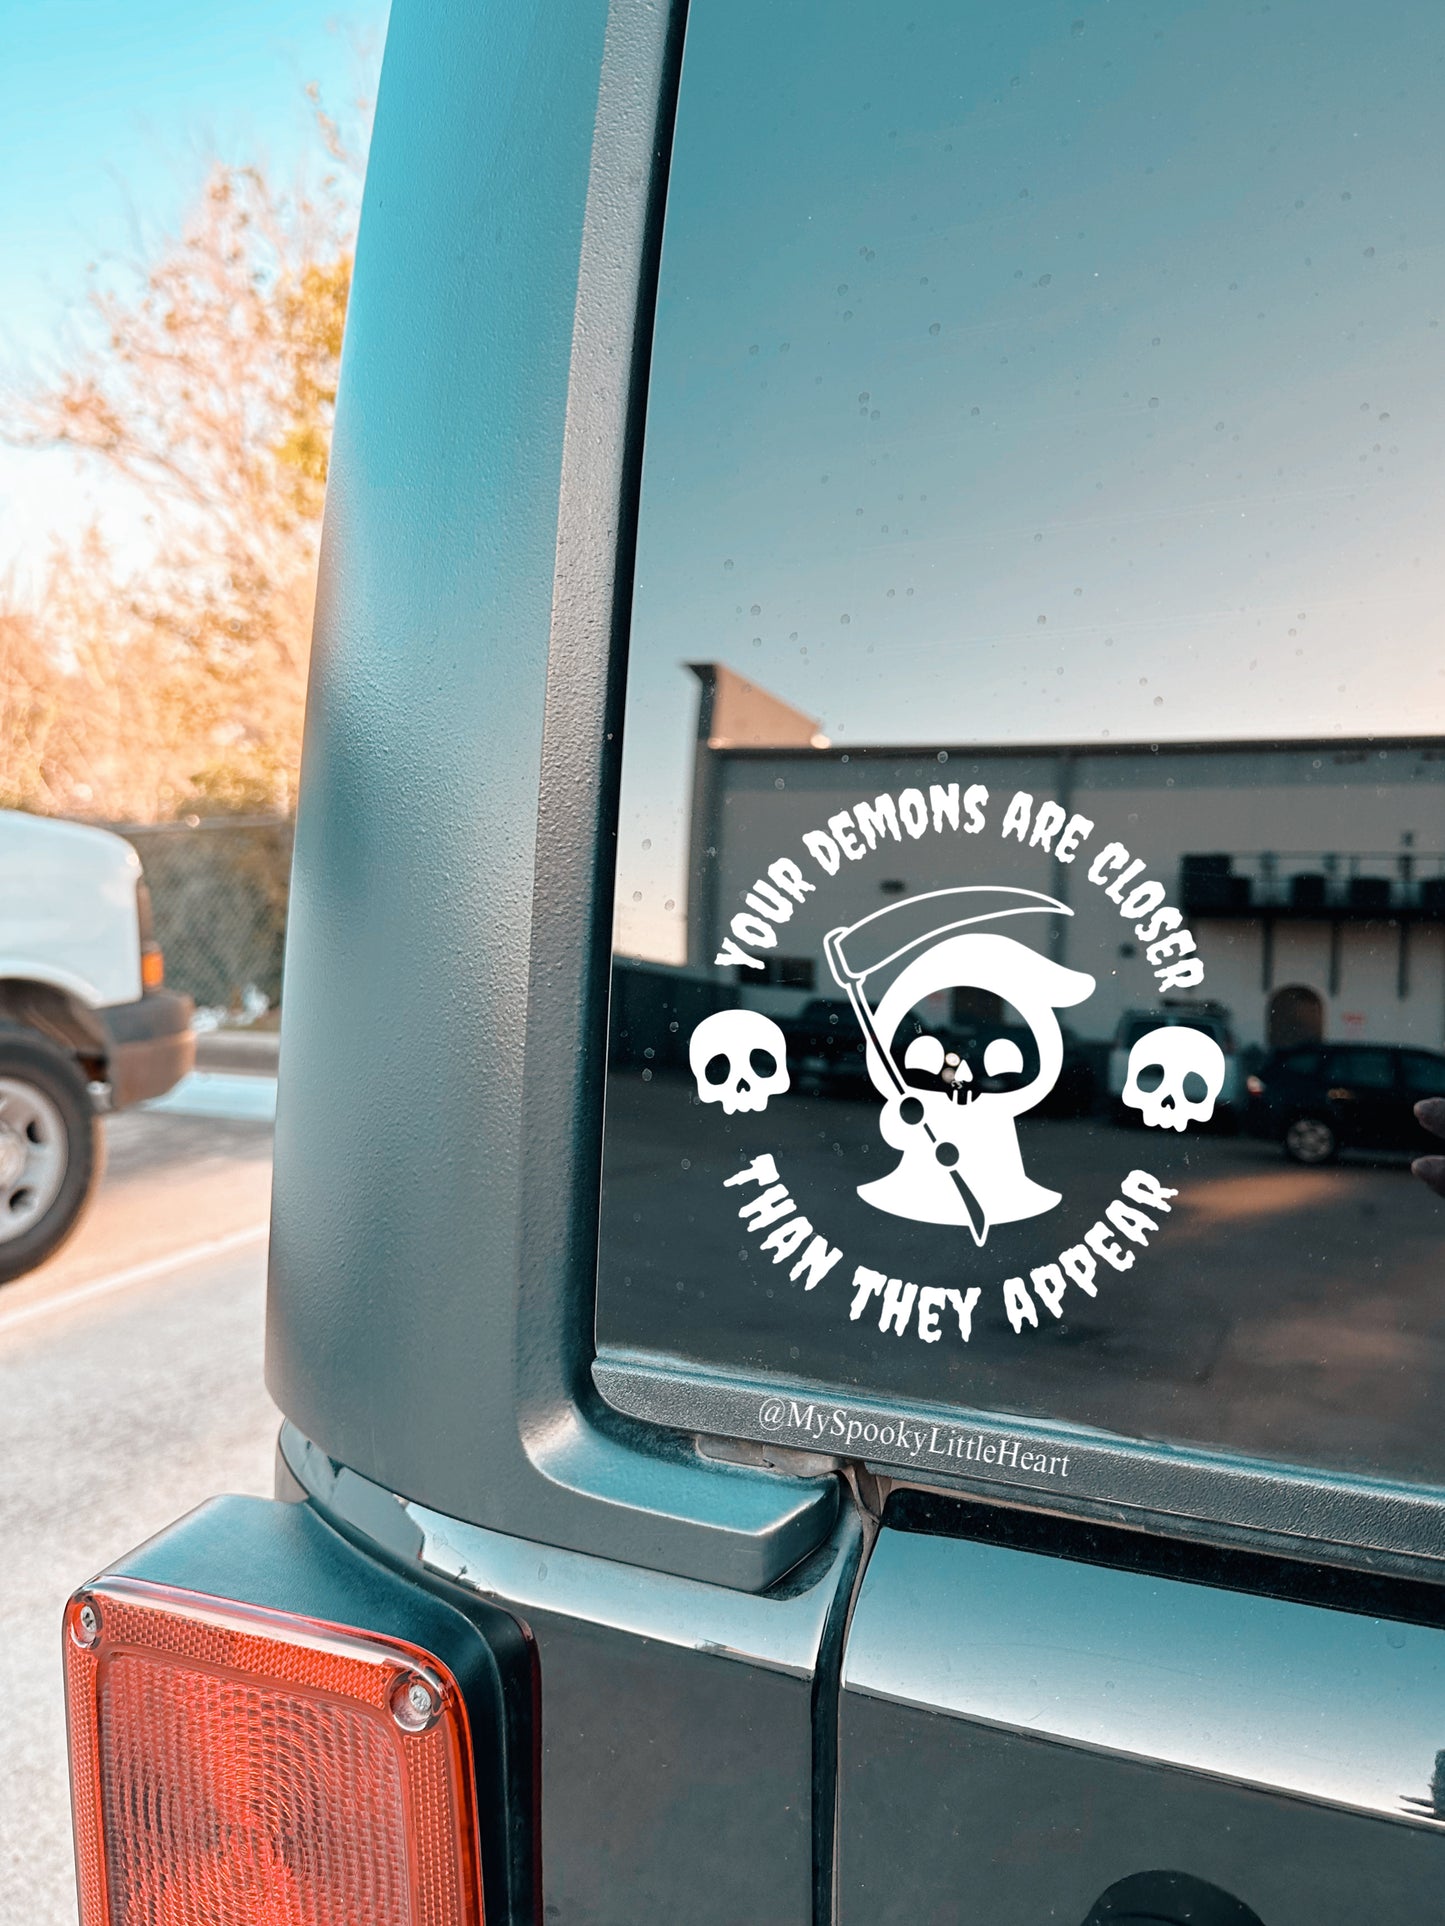 Your Demons are closer than they appear Grim Reaper Vinyl Decal